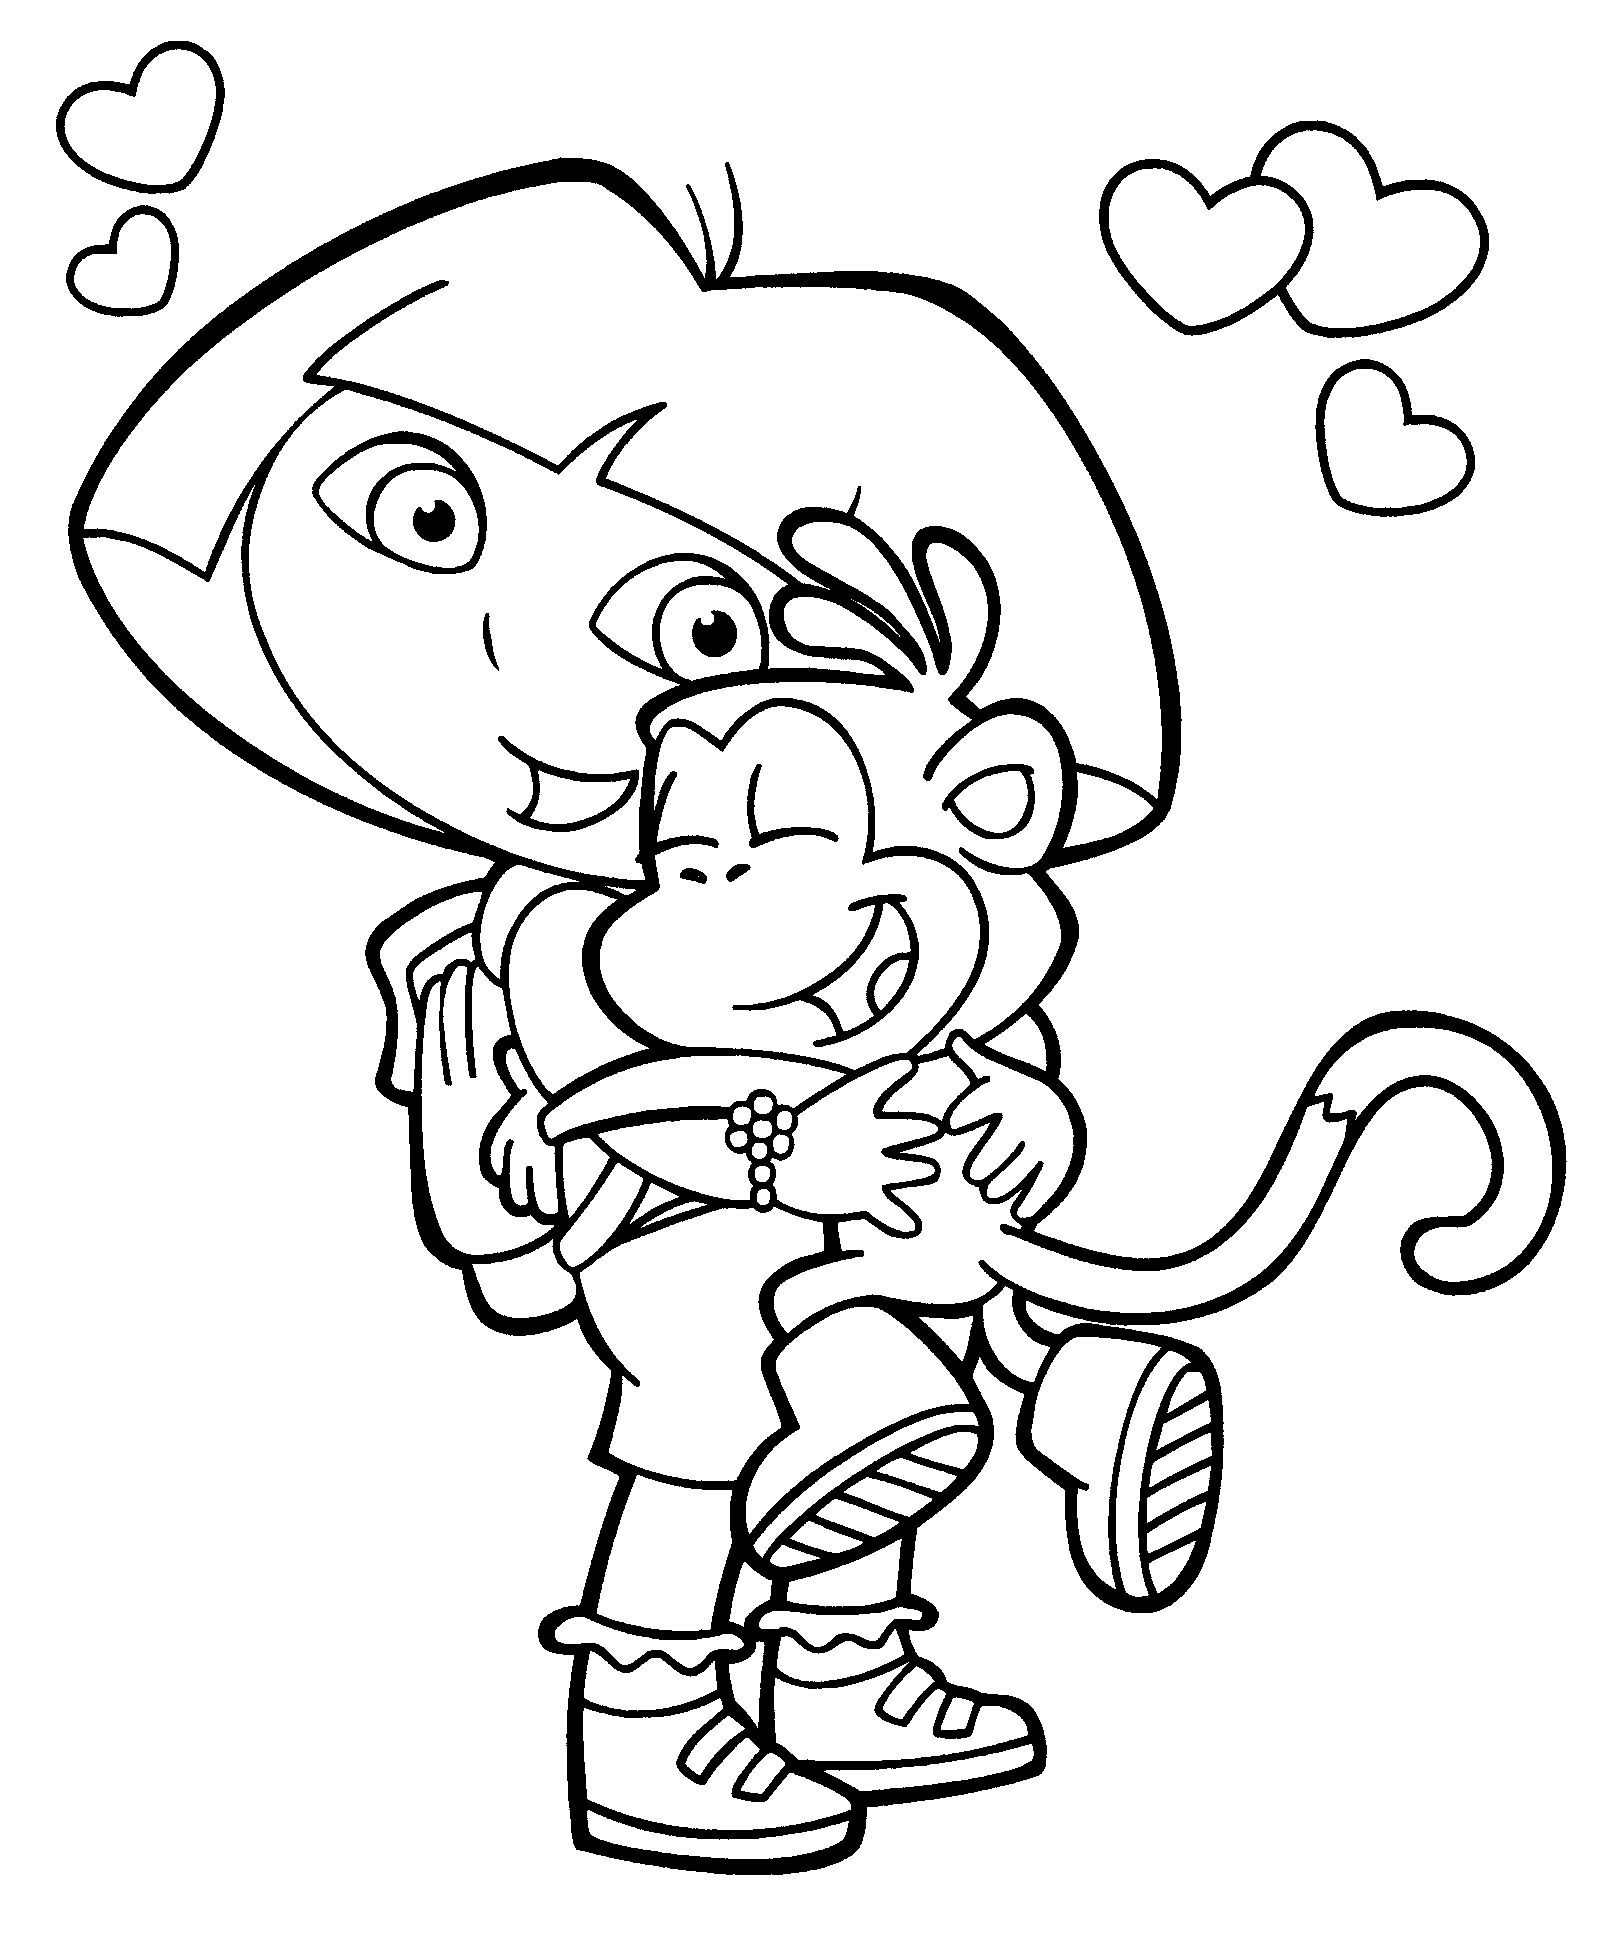 Dora Printable Coloring Pages
 free Dora pictures to print and color